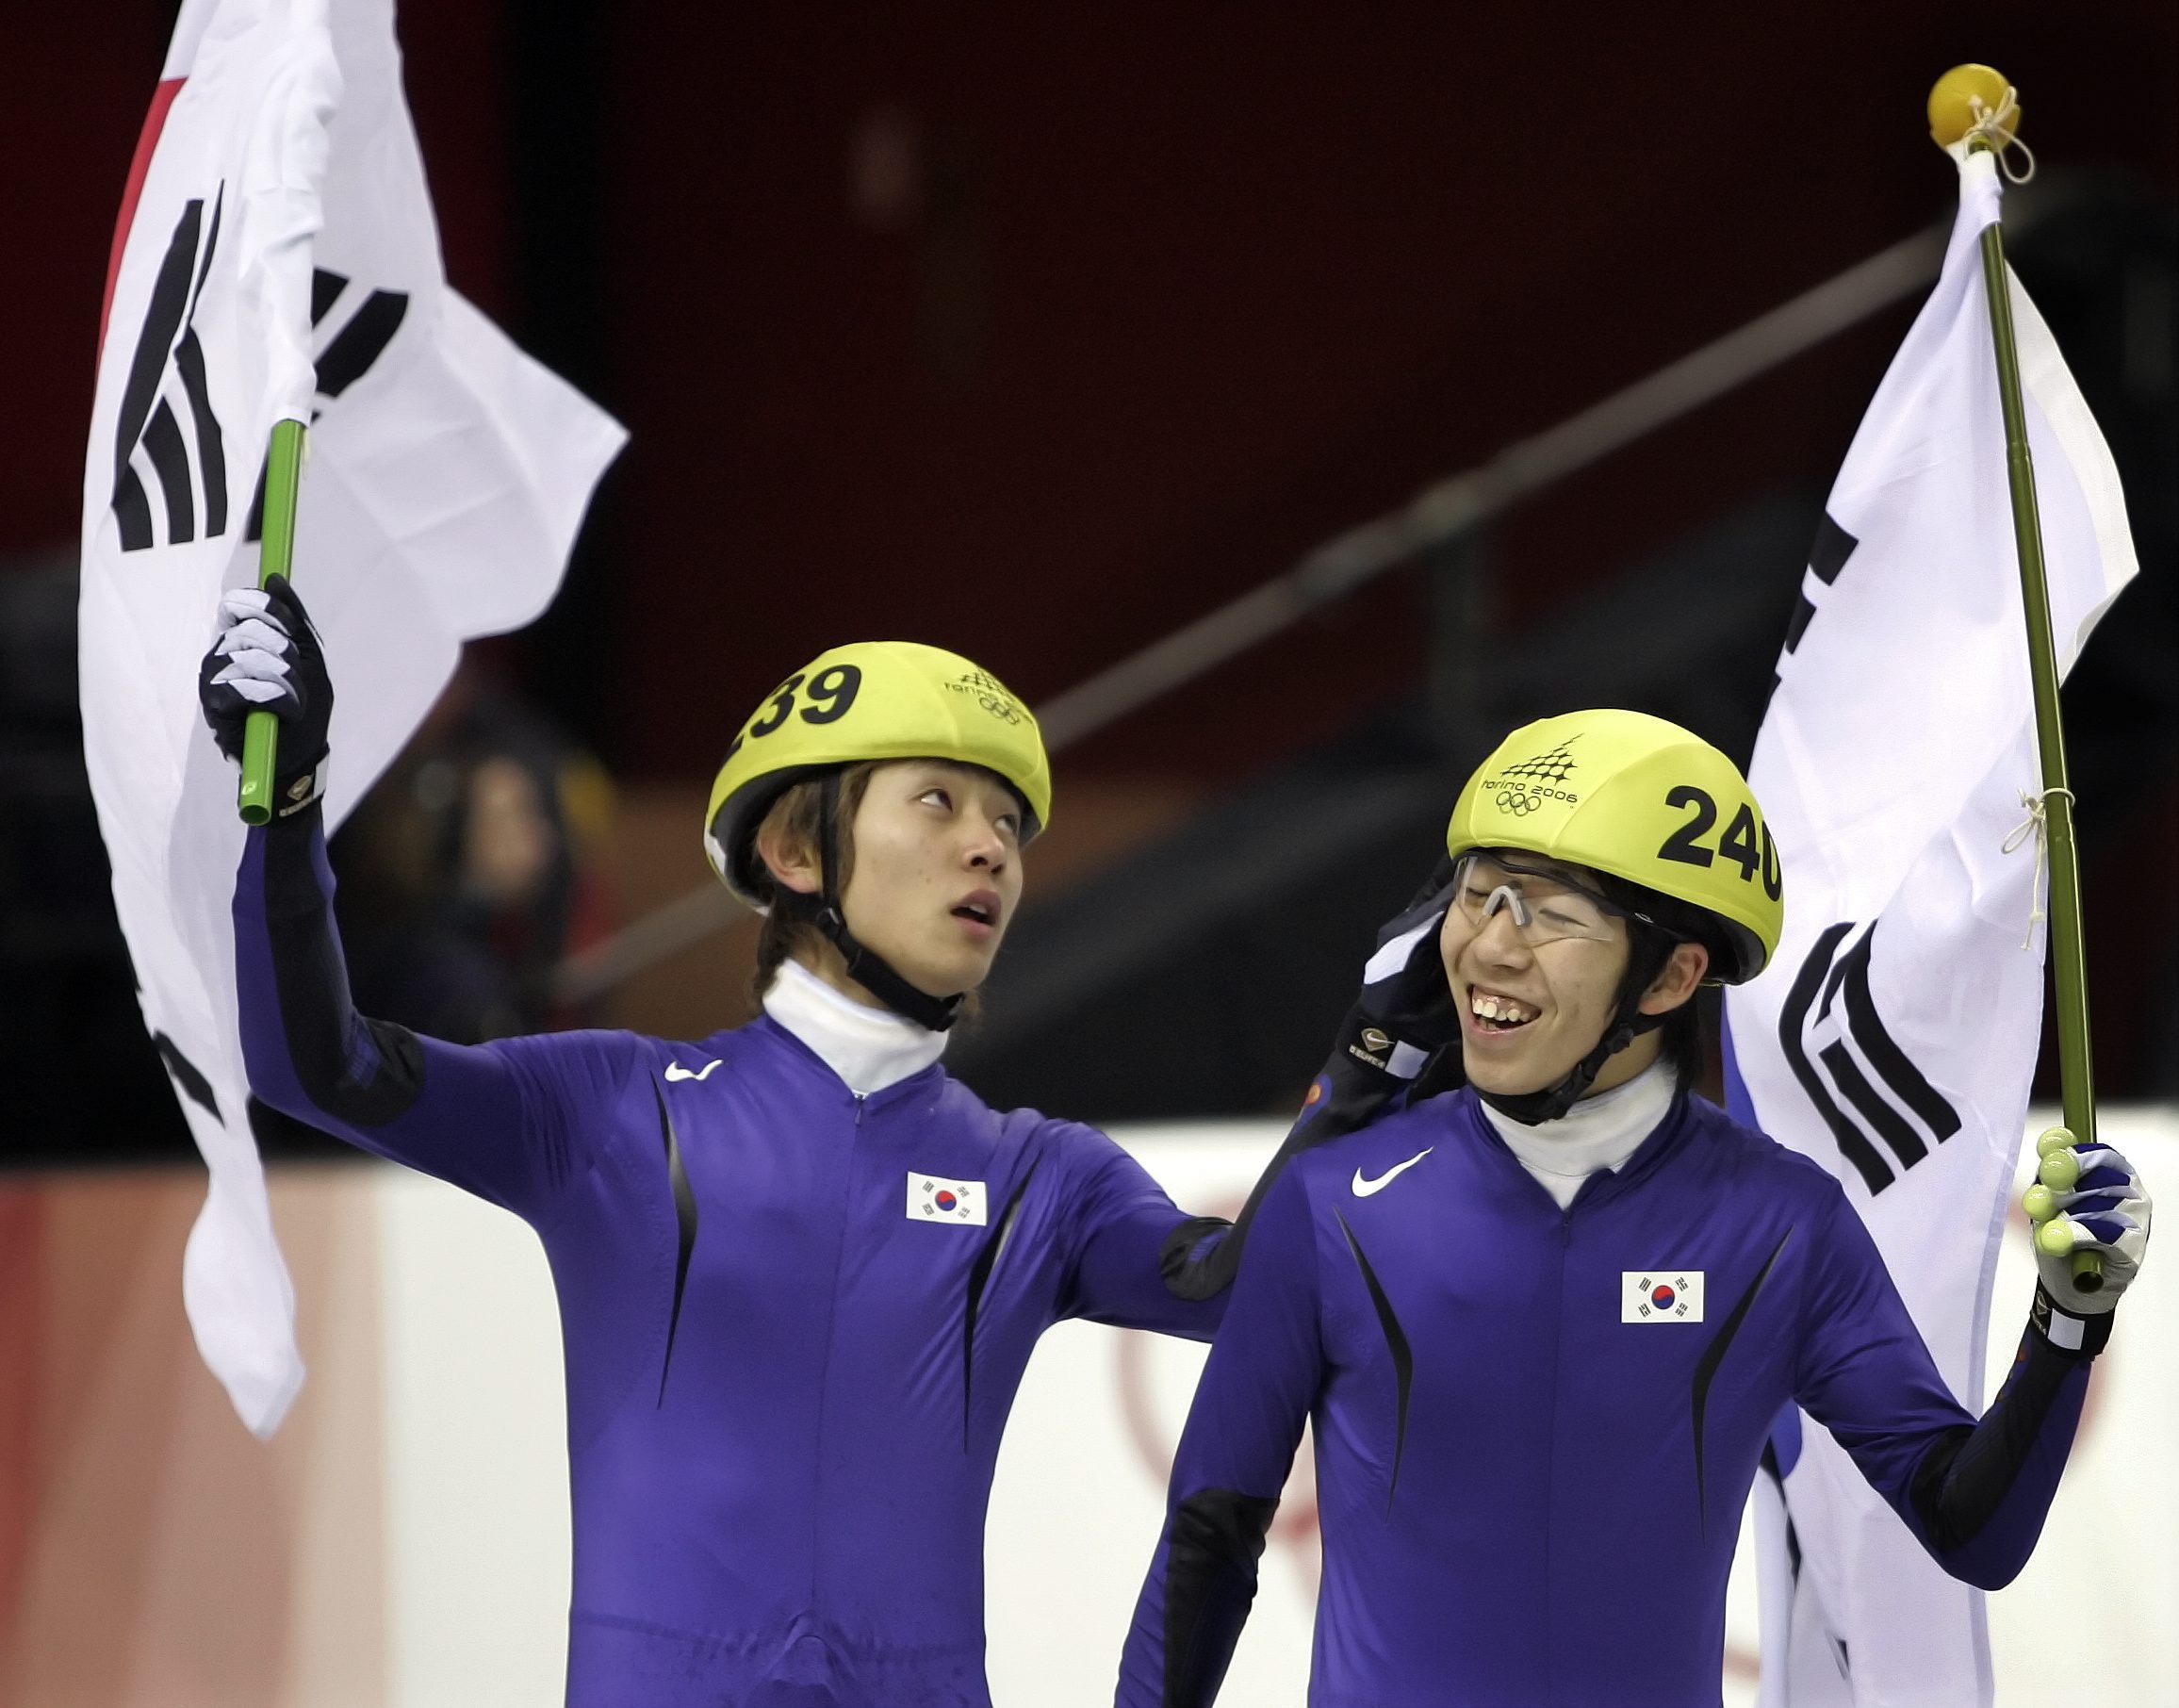 Olympic gold medalist Korea's Ahn Hyun-Soo, left, congratulates his teammate silver medalist Lee Ho-Suk after Hyun-So's gold medal victory in the Men's Short Track Speedskating 1500 meter race at the Turin 2006 Winter Olympic Games in Turin, Italy, Sunday, Feb. 12, 2006. (AP Photo/Eric Gay)